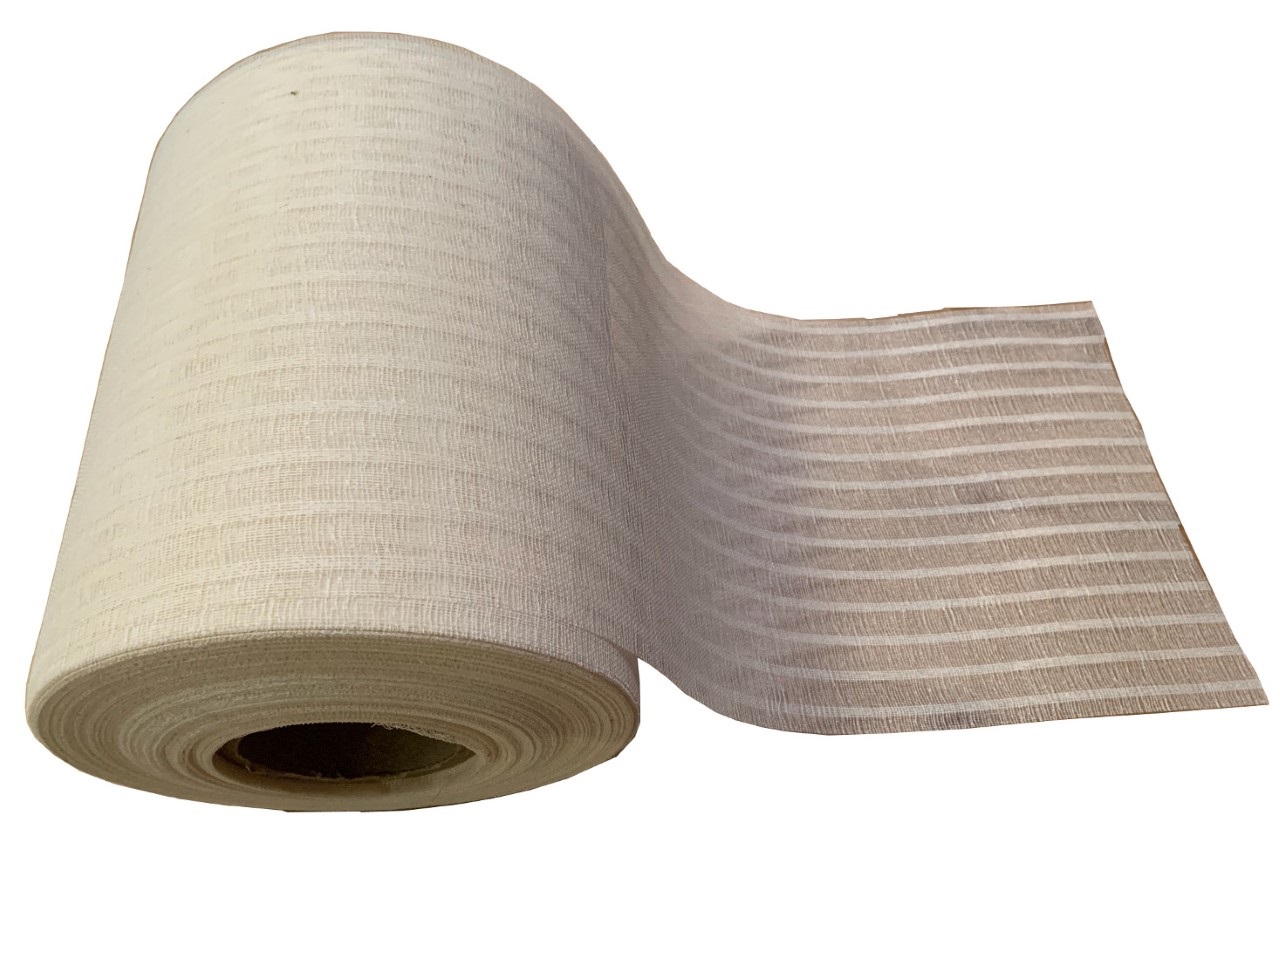 10" wide Crionline Fabric (Natural) 42 x 17 - 100 Yard Roll